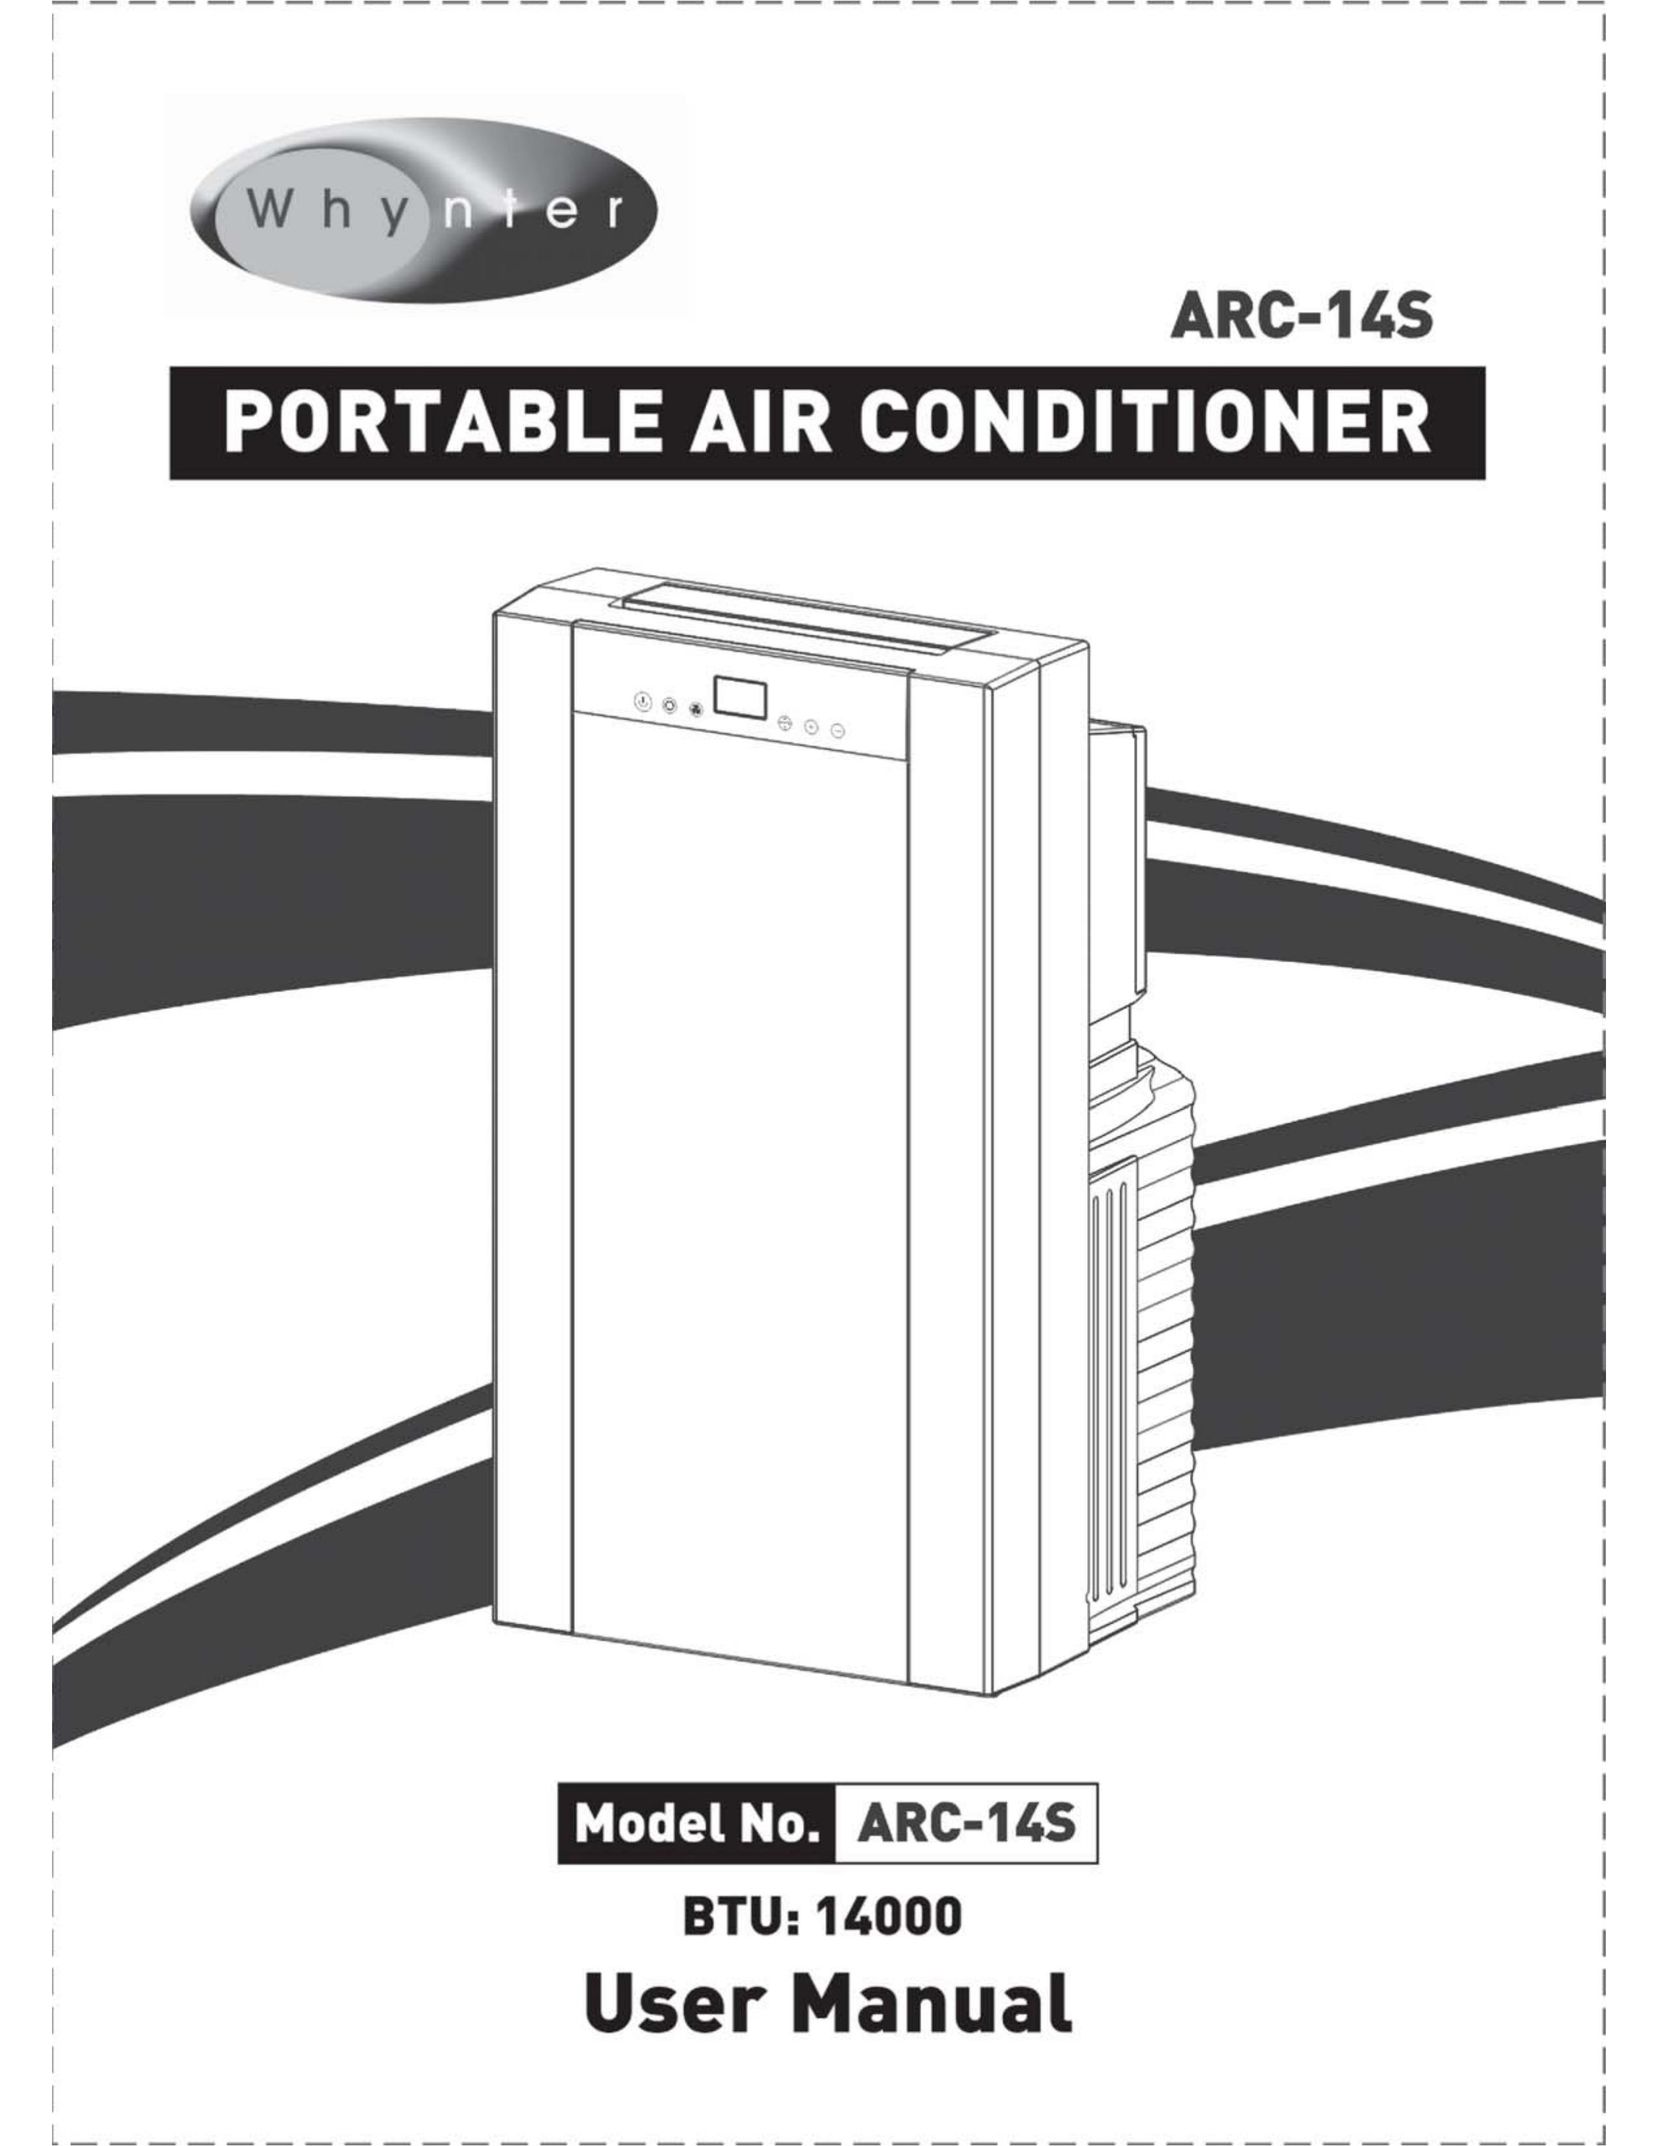 Whynter ARC-14S Air Conditioner User Manual